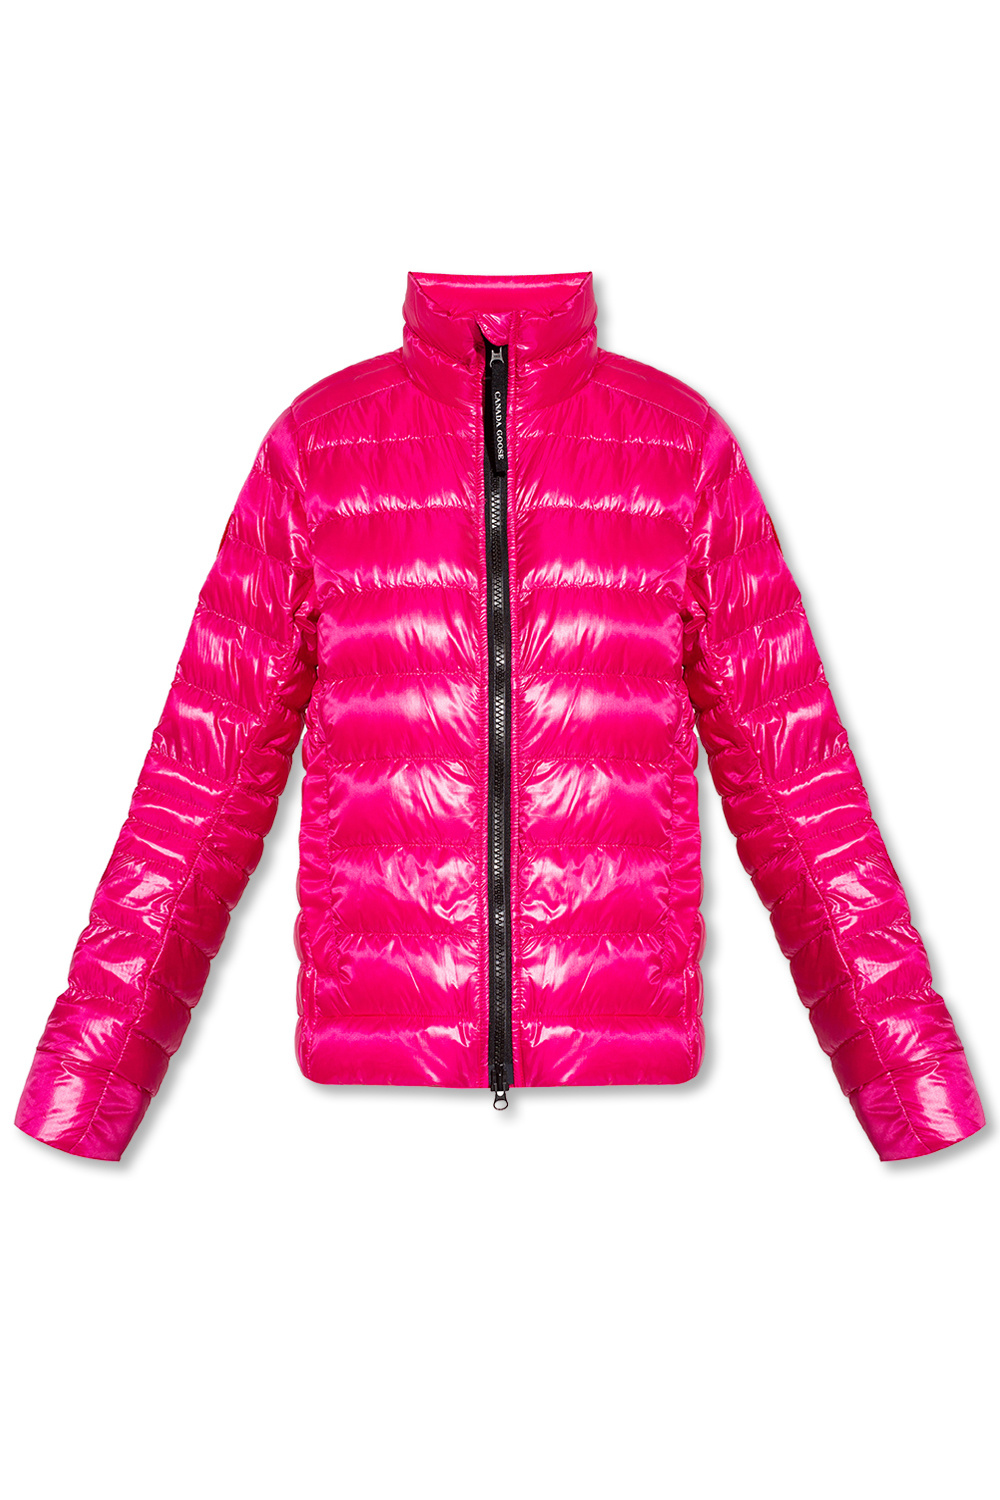 Canada Goose ‘Cypress’ quilted jacket | Women's Clothing | Vitkac